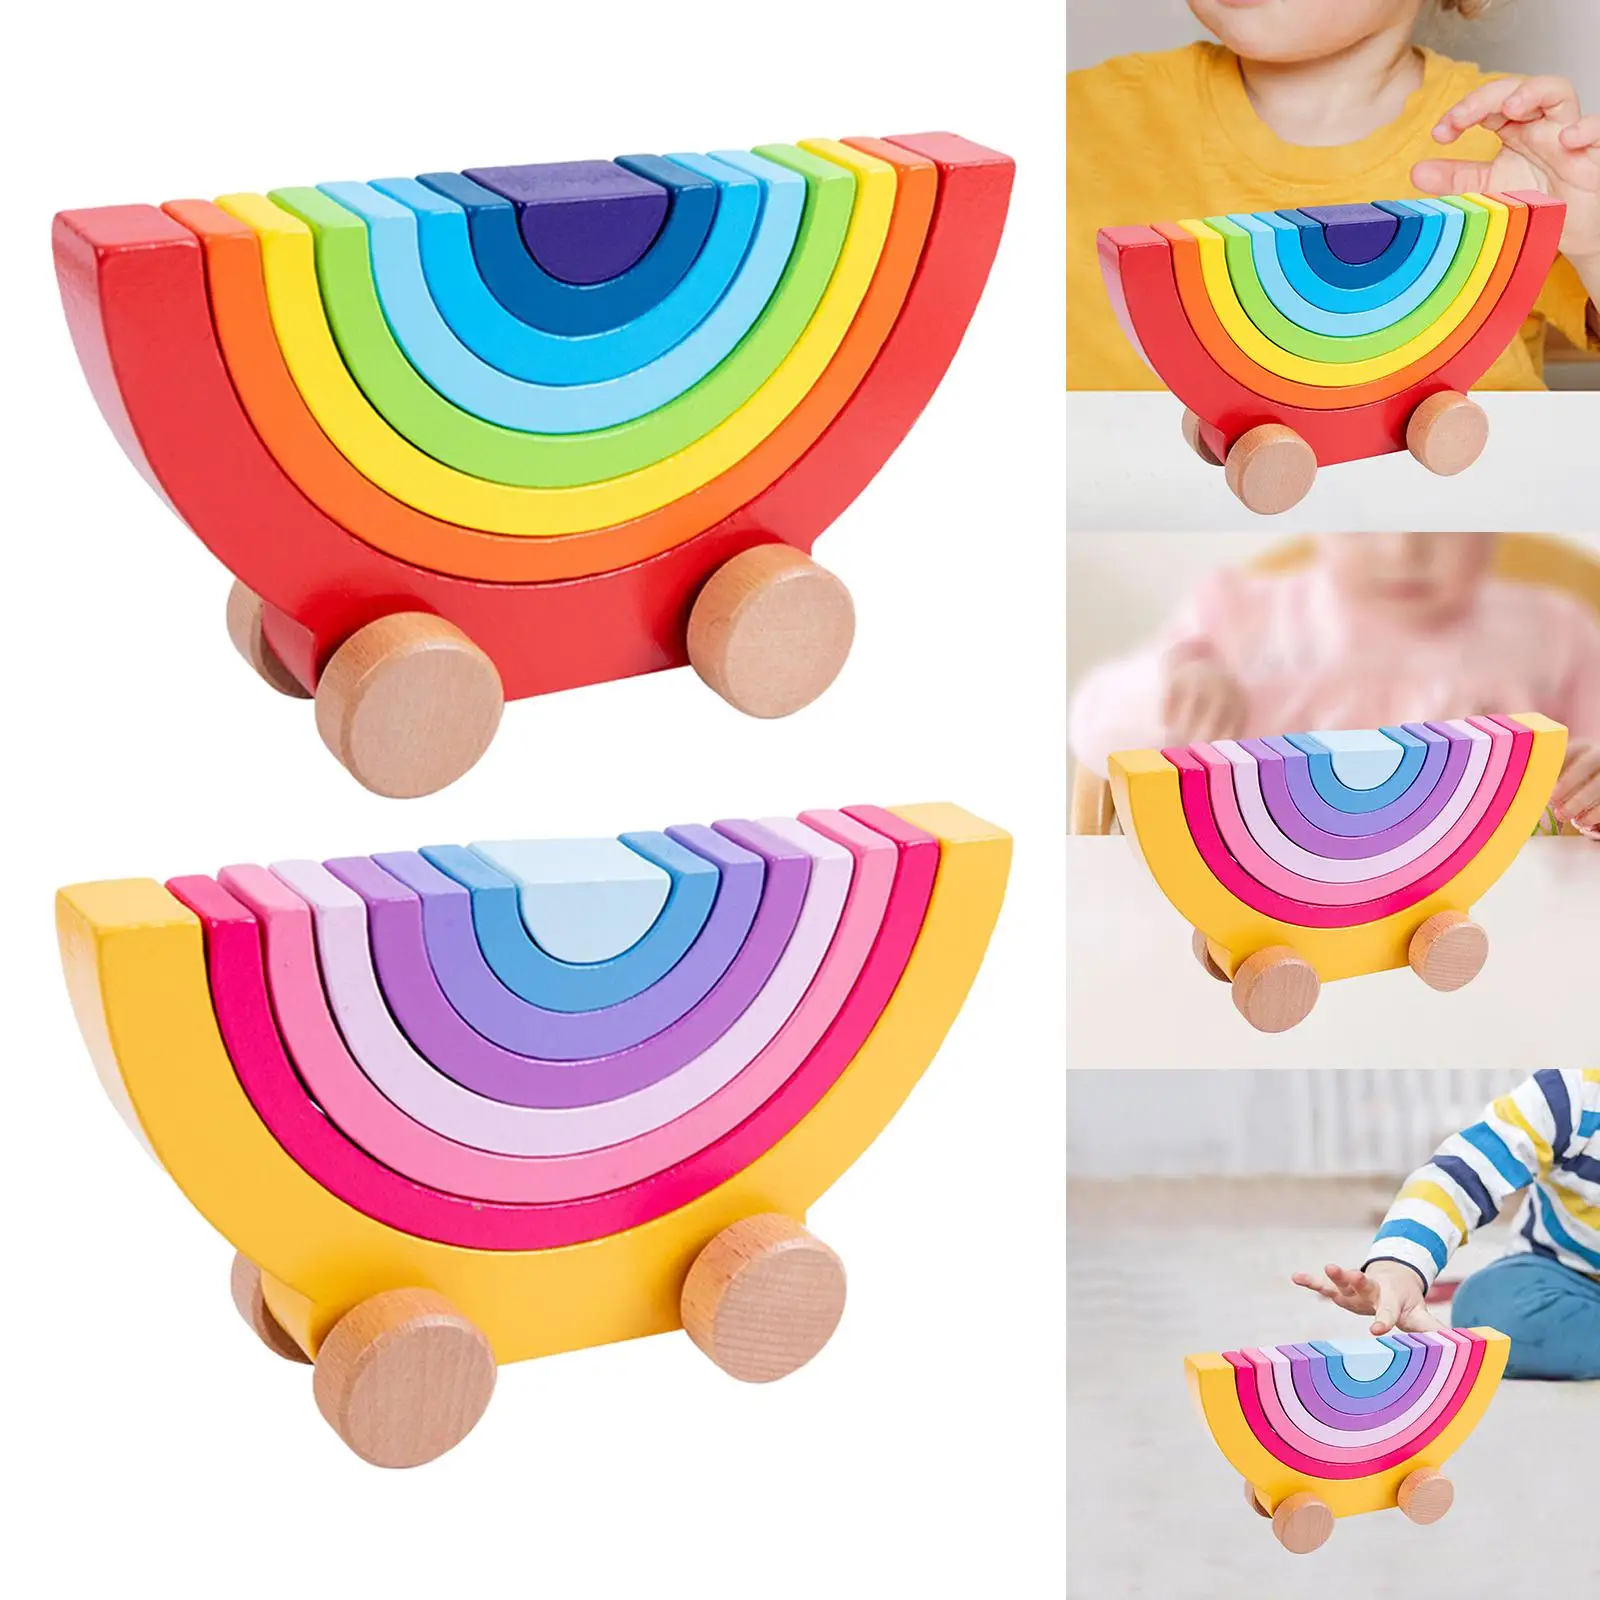 1 Set Wooden Building Blocks Car Toy Stackable Decor Gift Development Stacker Colorful Arch for Game Children Toddlers Teaching